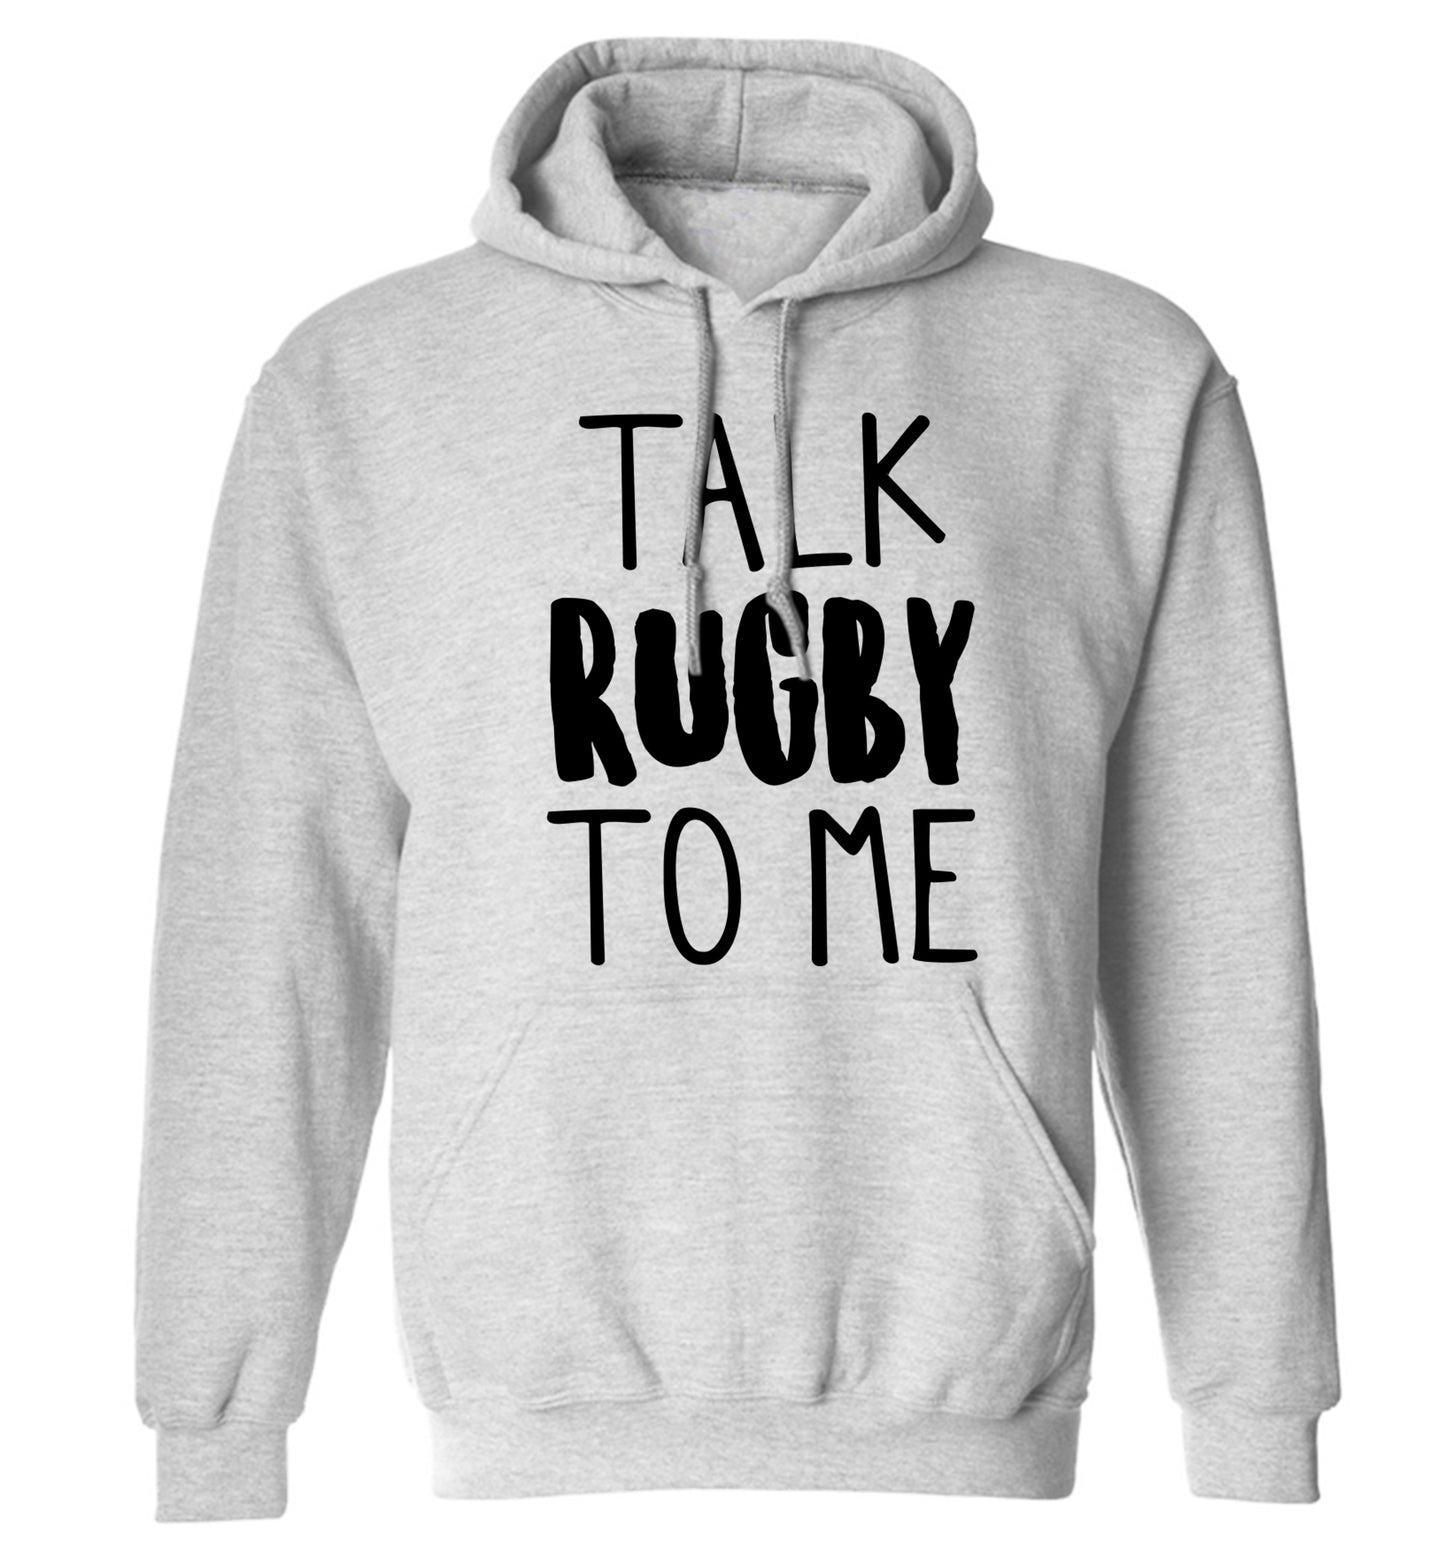 Talk rugby to me adults unisex grey hoodie 2XL